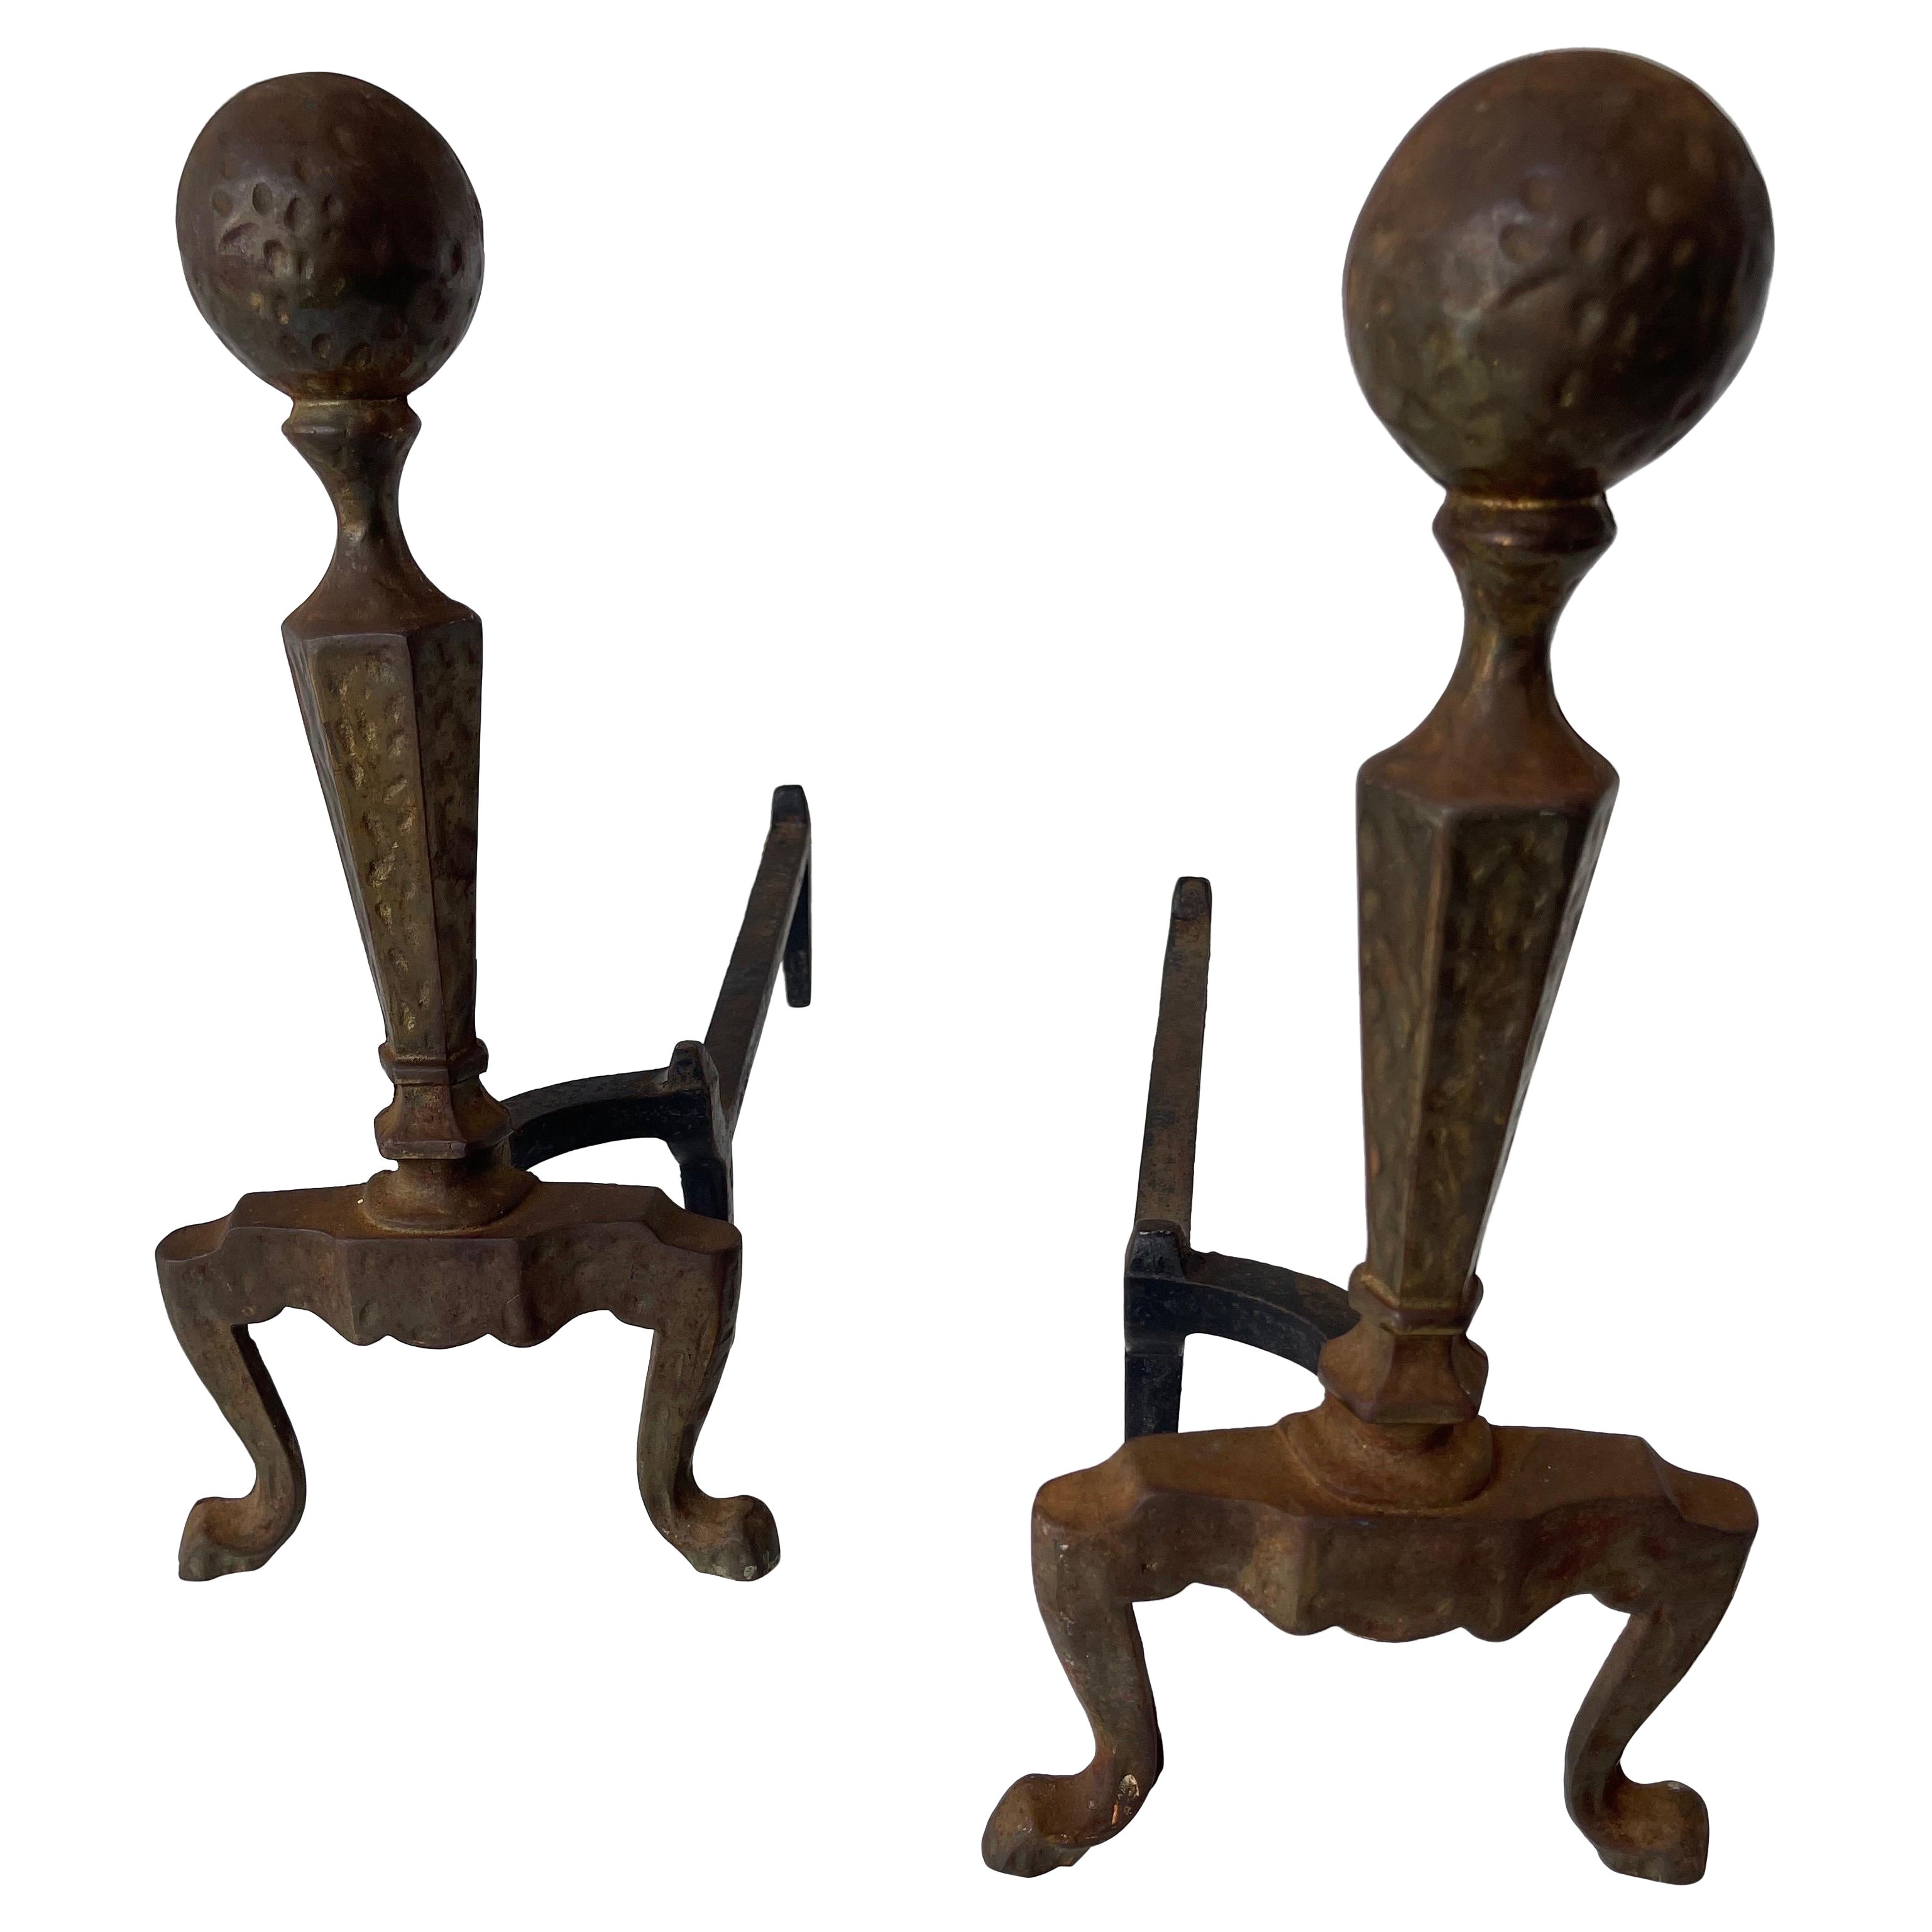 Pair of Art & Craft Hammered Cast Iron Andirons For Sale